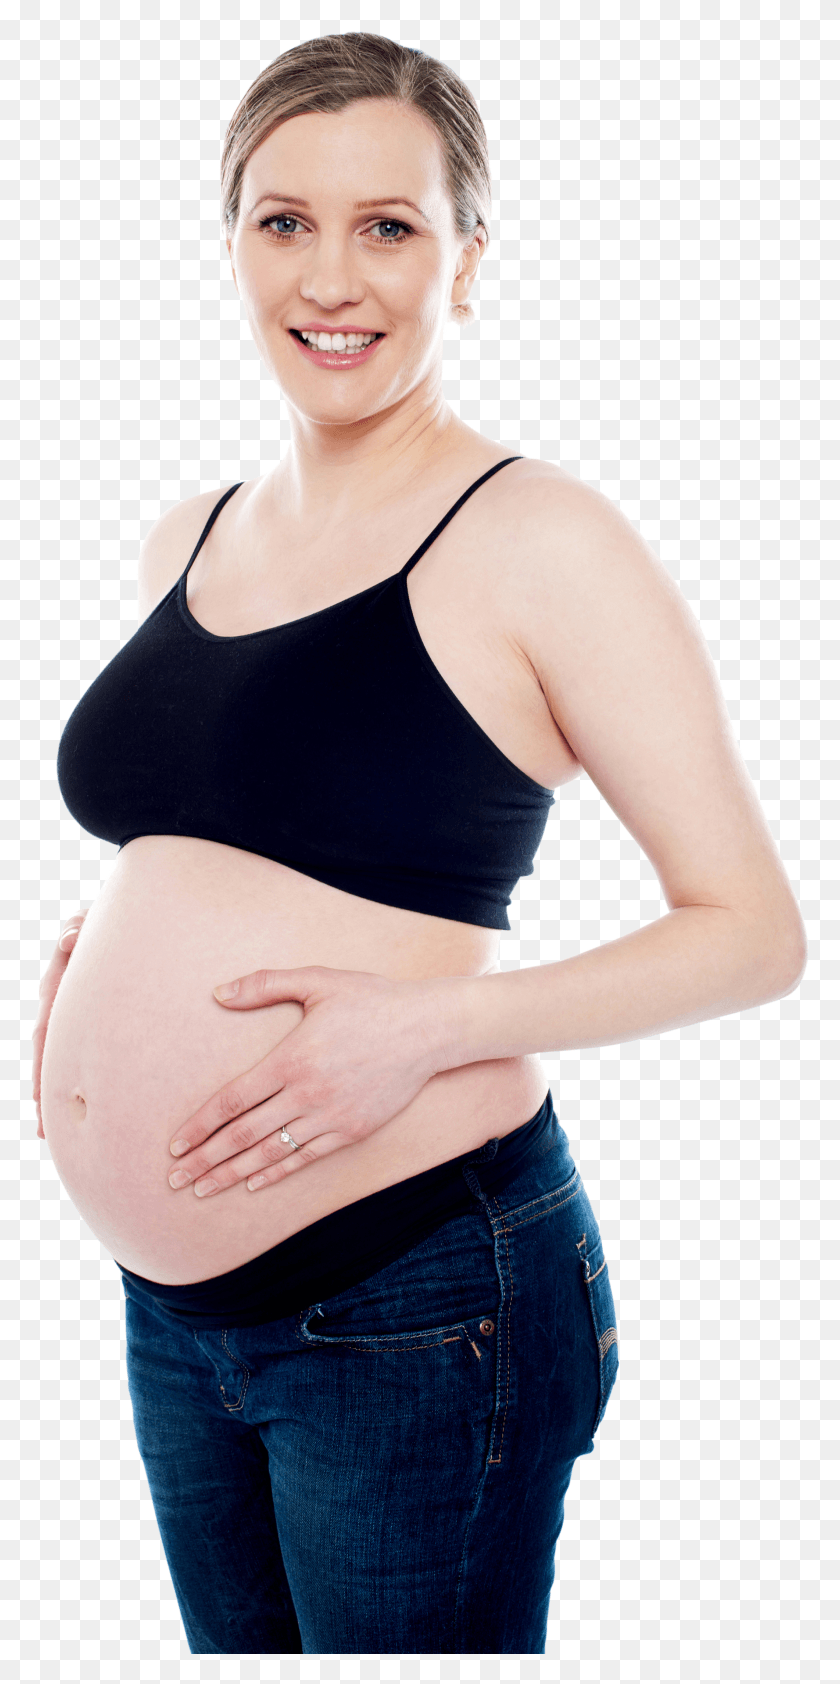 2122x4419 Pregnant Woman Exercise Free Image Pregnant Woman Transparent HD PNG Download